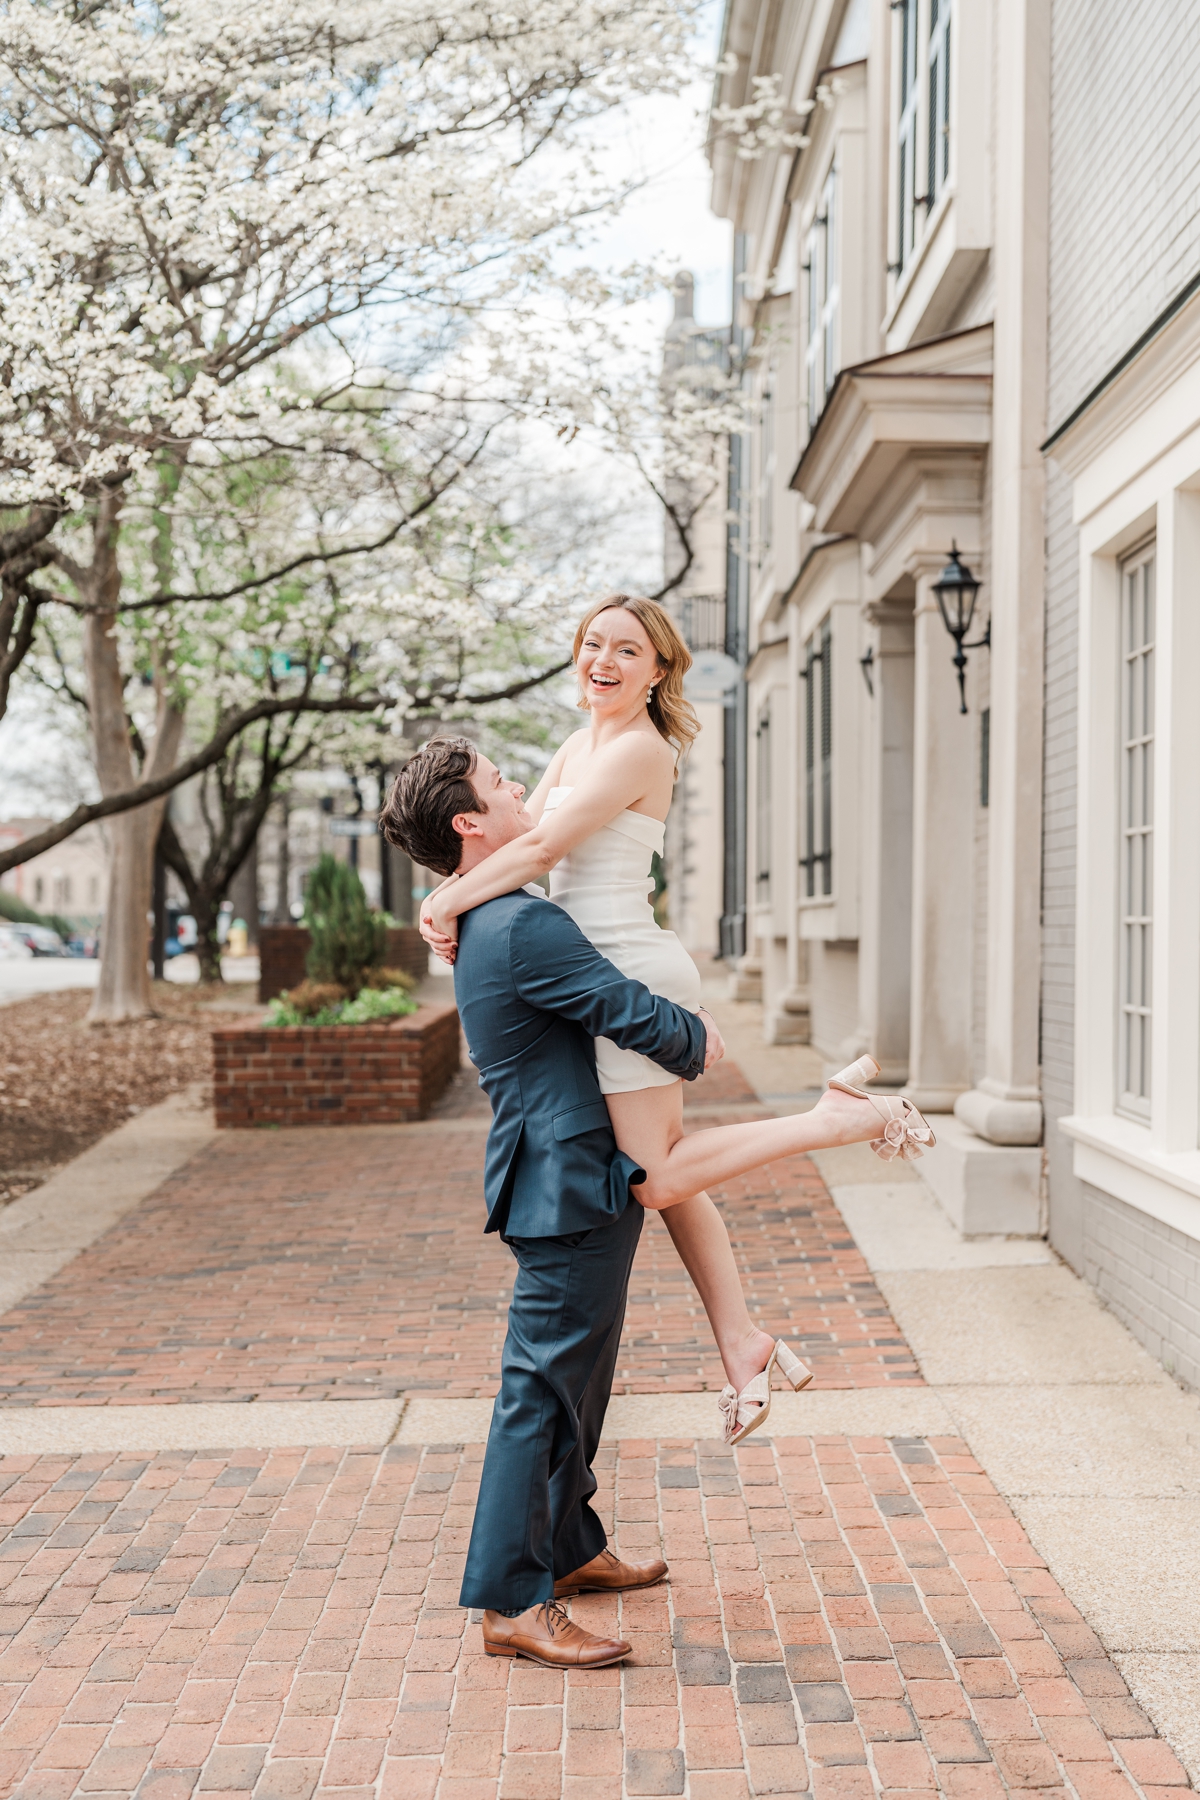 Man picks up woman while she smiles at the camera for their Huntsville, Alabama engagement shoot